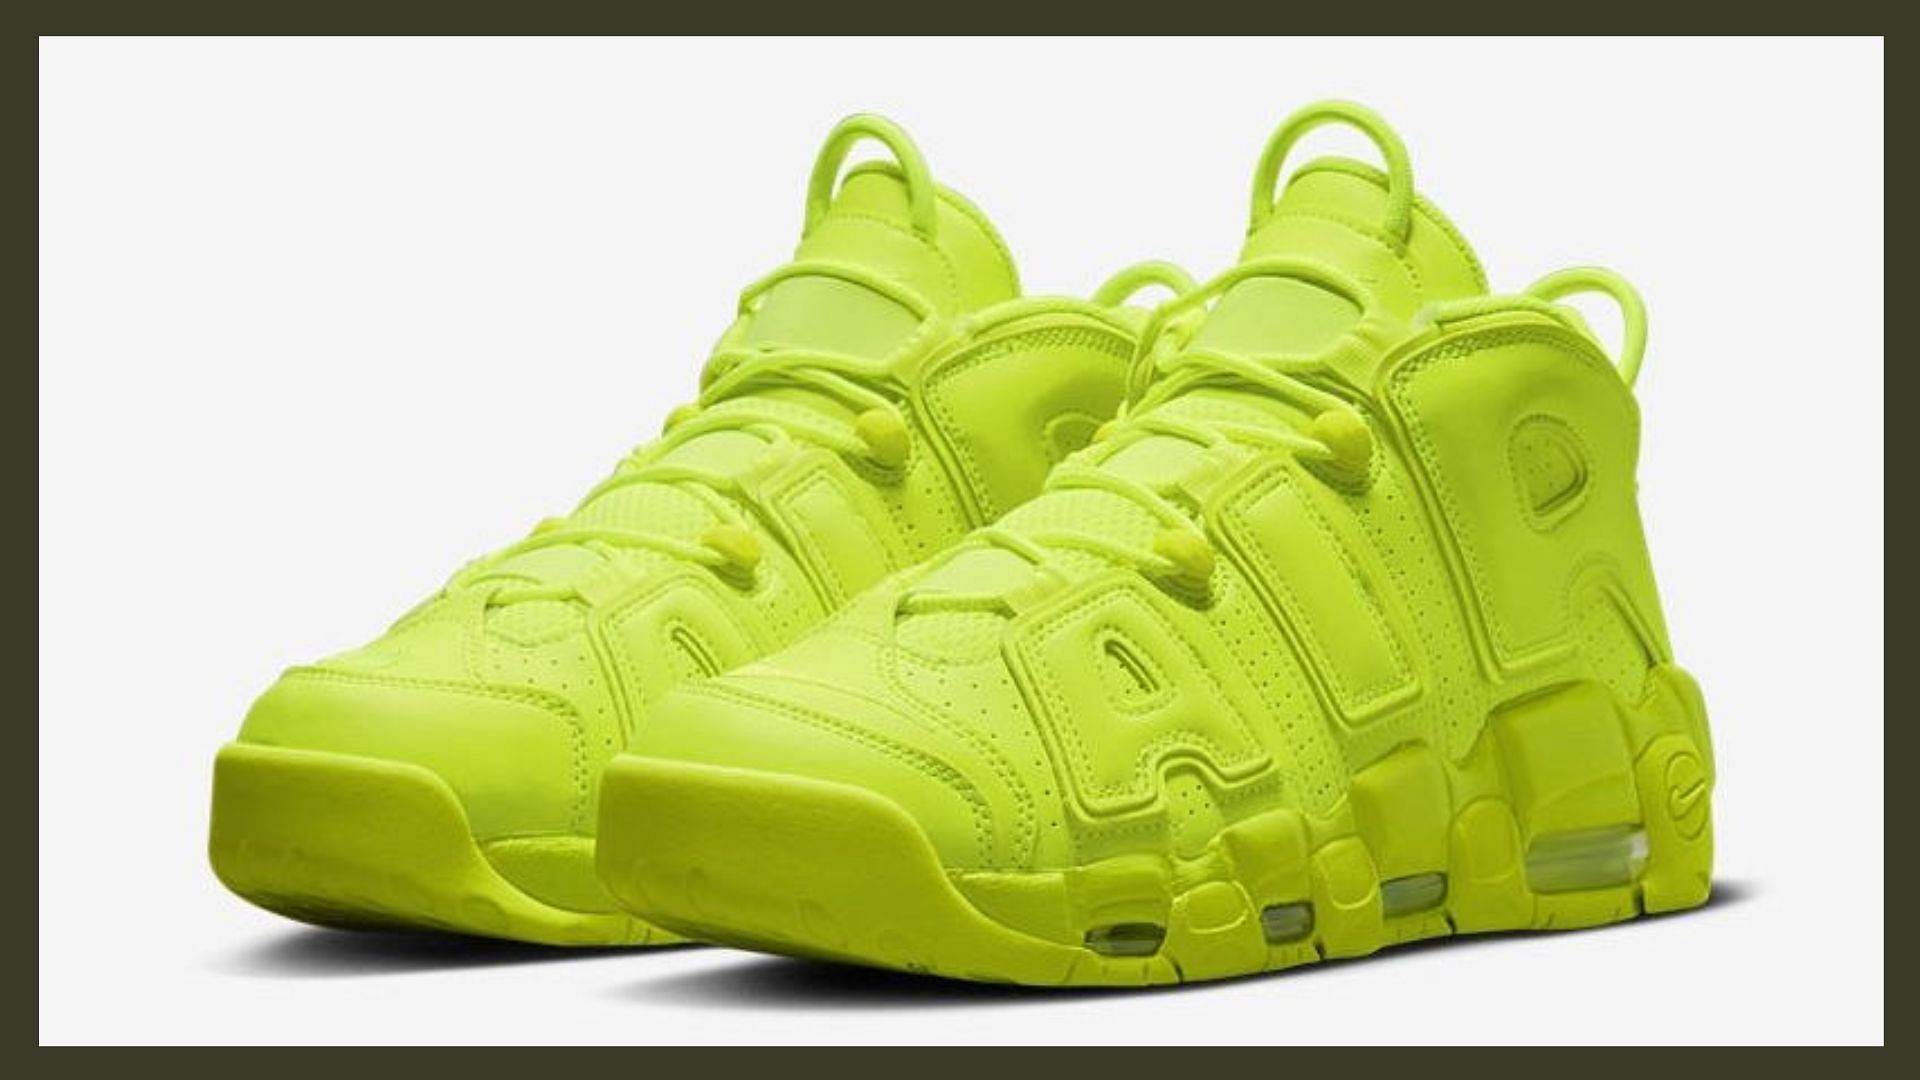 Where to buy Nike Air More Uptempo '96 Volt shoes? Price, release